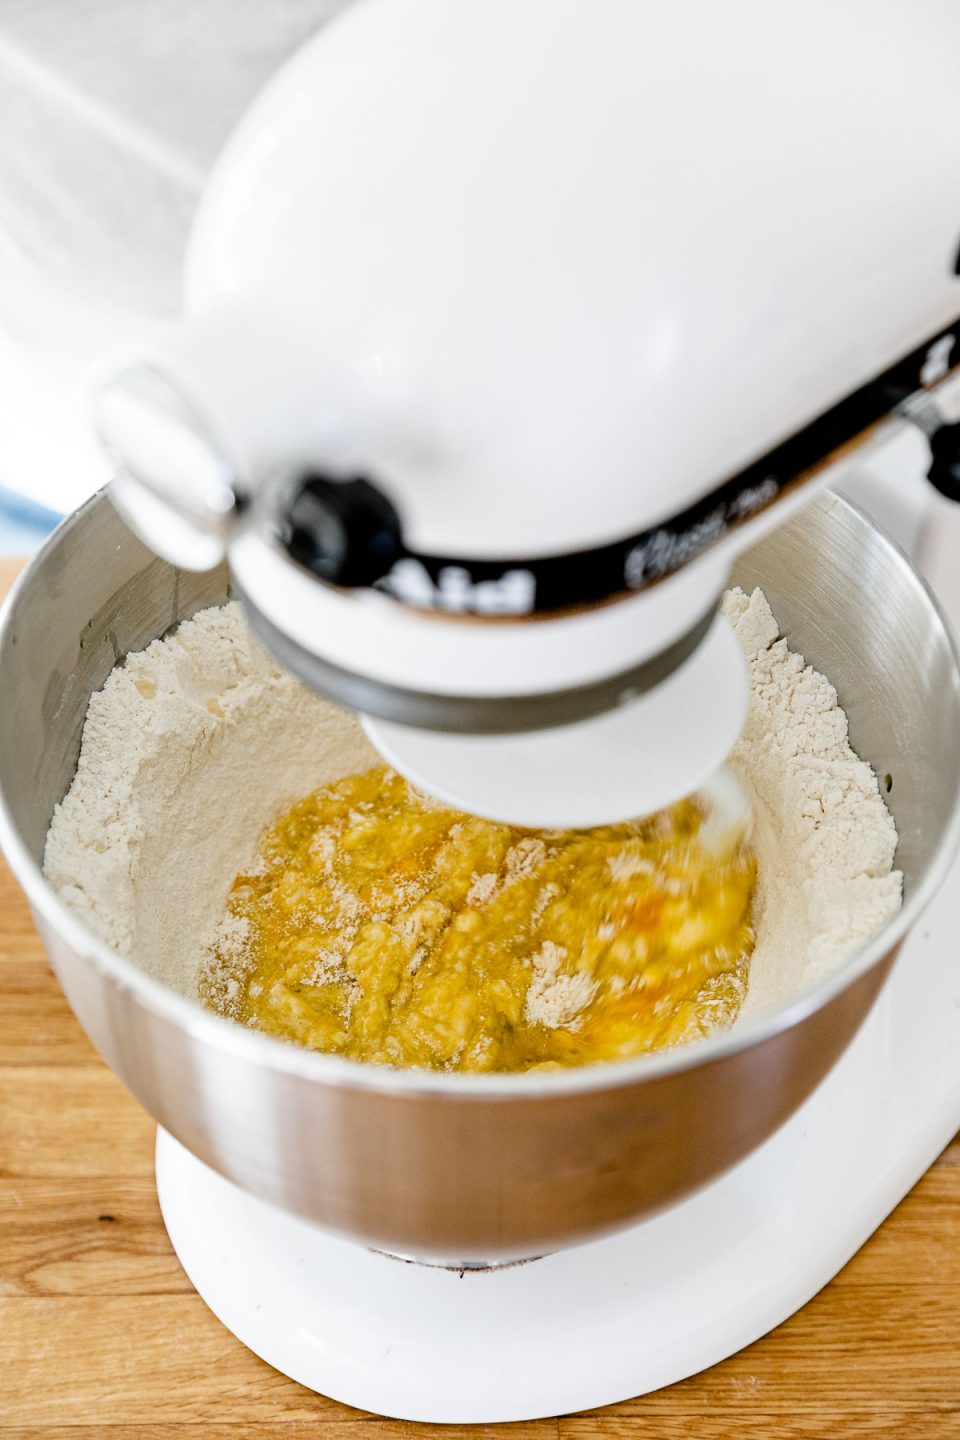 How to Make Fresh Pasta Dough with a Stand Mixer, Step 2: Mix the pasta dough. A KitchenAid Stand Mixer with the dough hook attachment connected is turned on and being used to mix wet ingredients into a well of flour to create fresh pasta dough. The stand mixer rests atop a butcher block countertop.